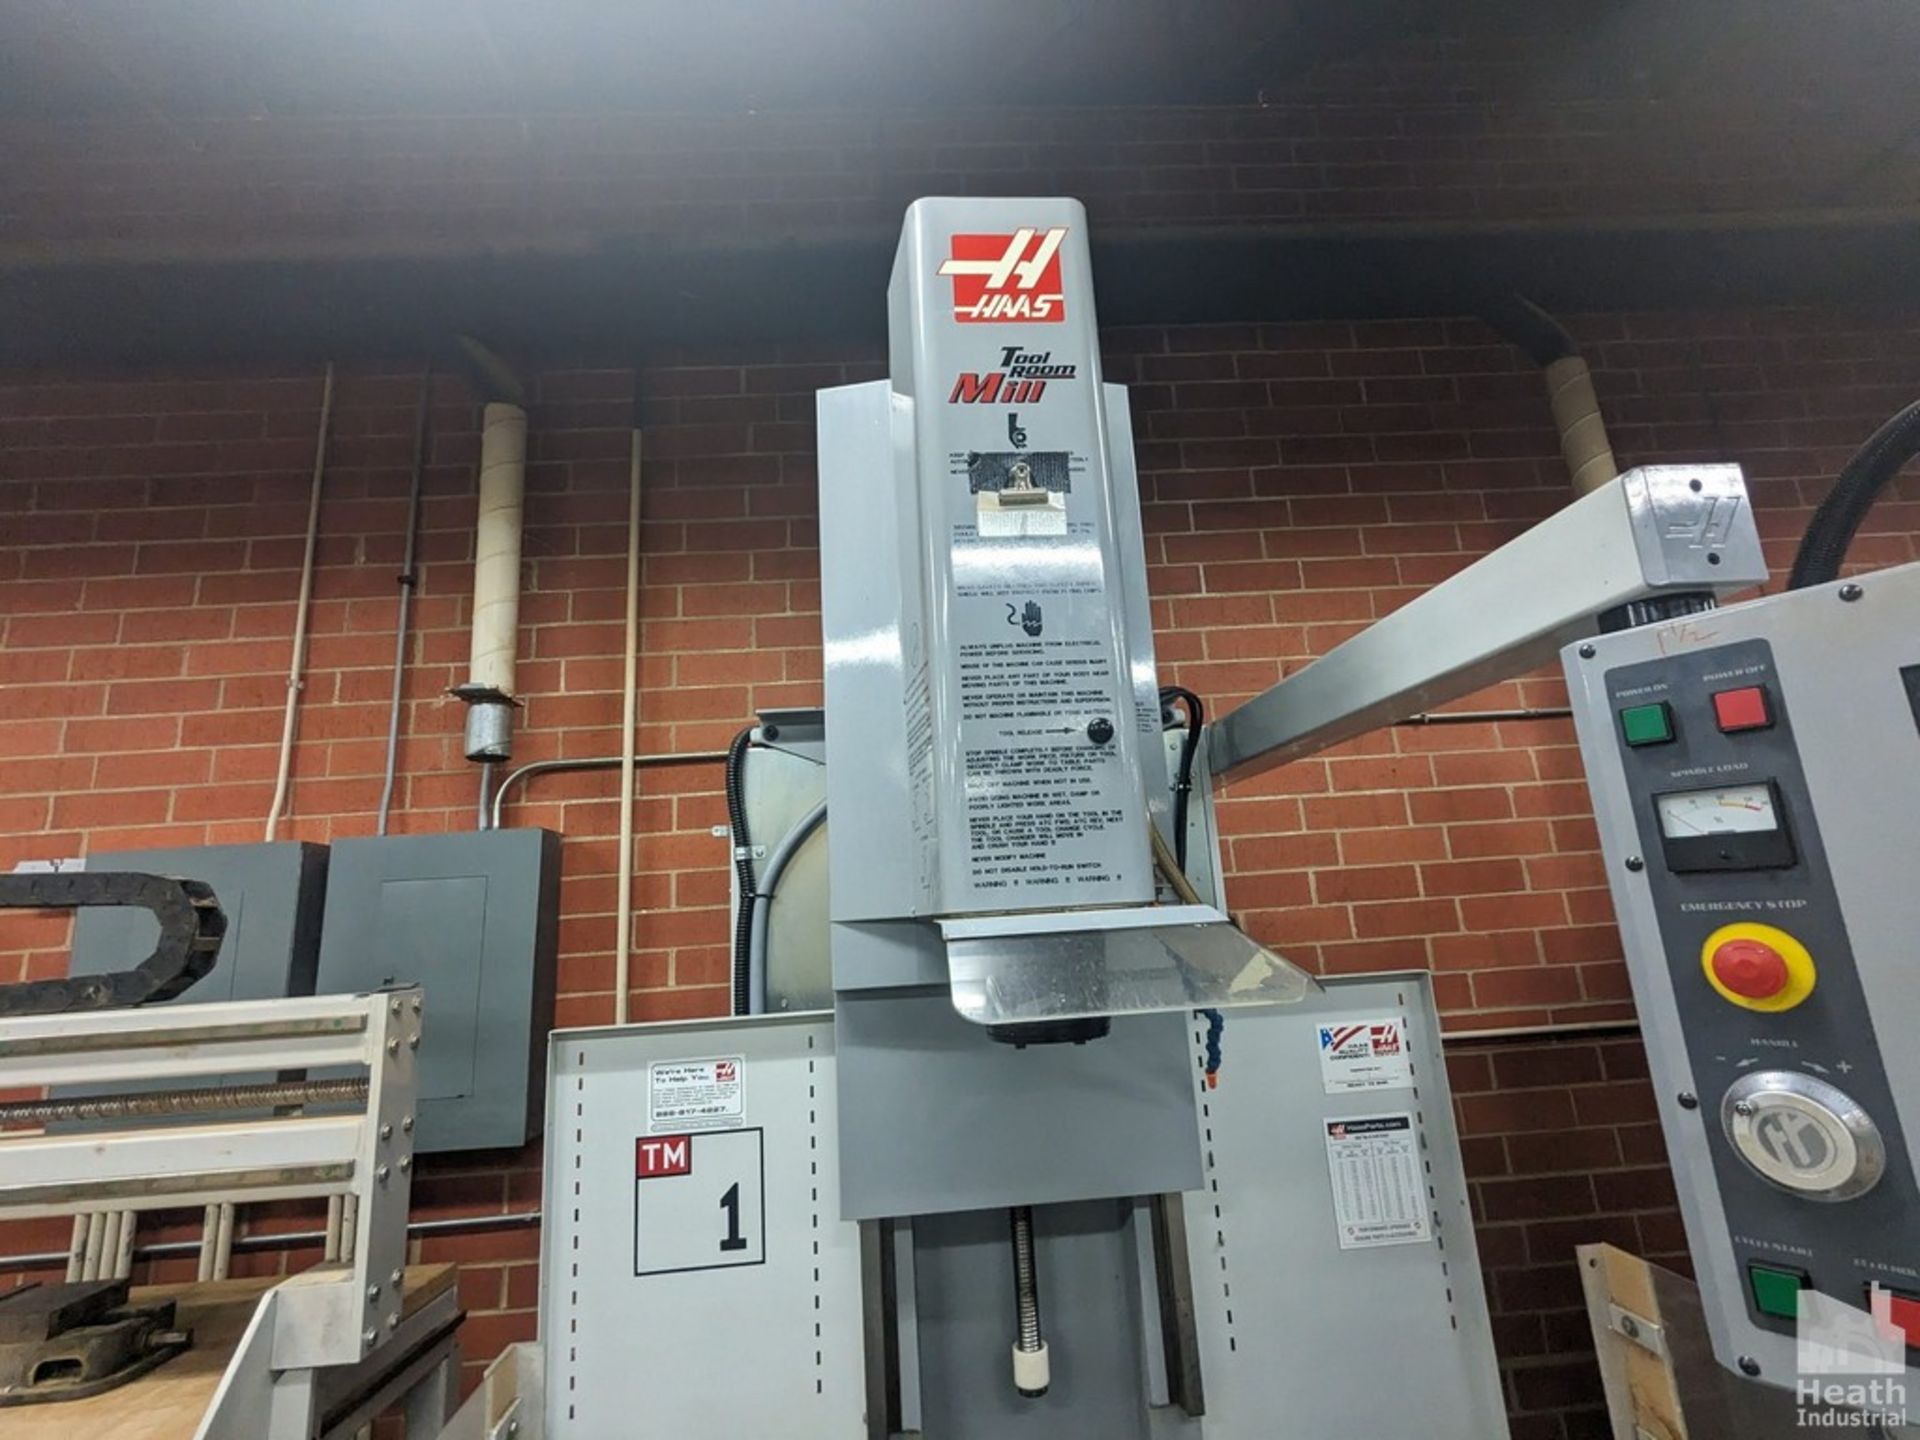 HAAS 3-AXIS MODEL TM-1 CNC VERTICAL MACHINING CENTER, S/N 43825 (NEW 2005) 11"X48" TABLE, 30" X-AXIS - Image 2 of 7